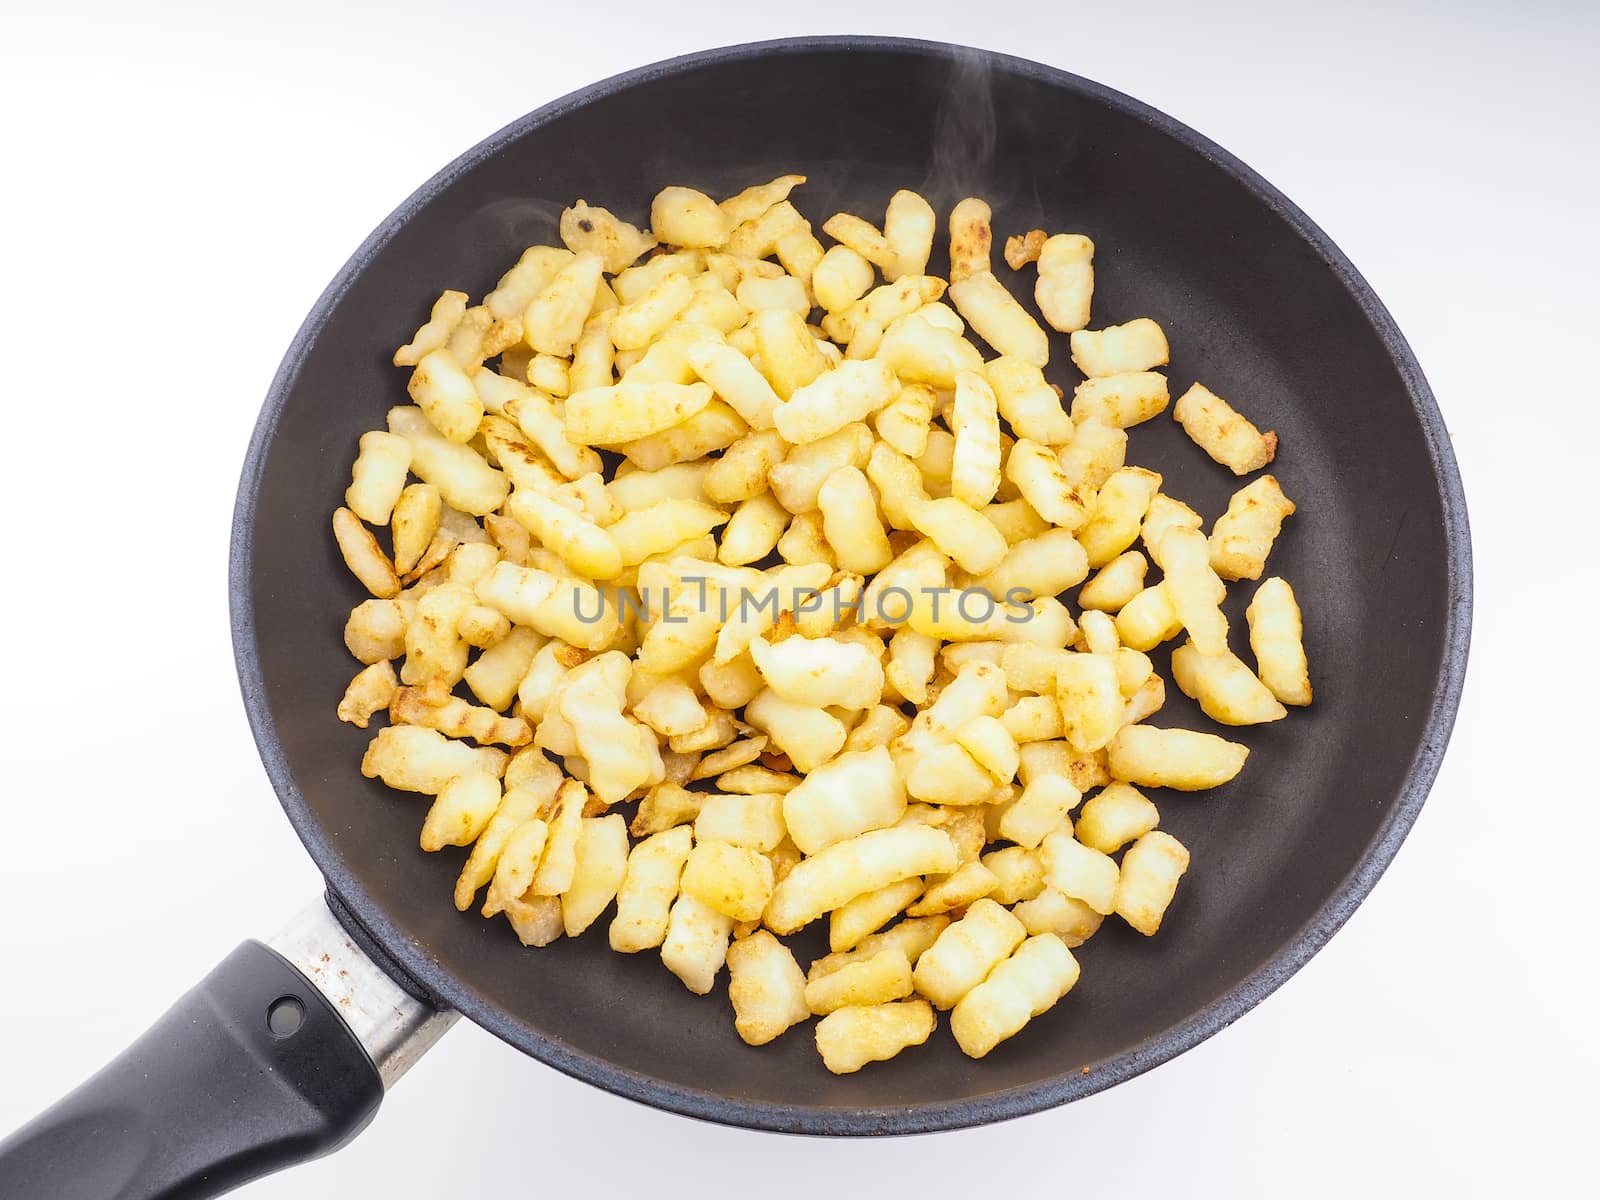 Frying chopped potatoes in a fry pan by Arvebettum